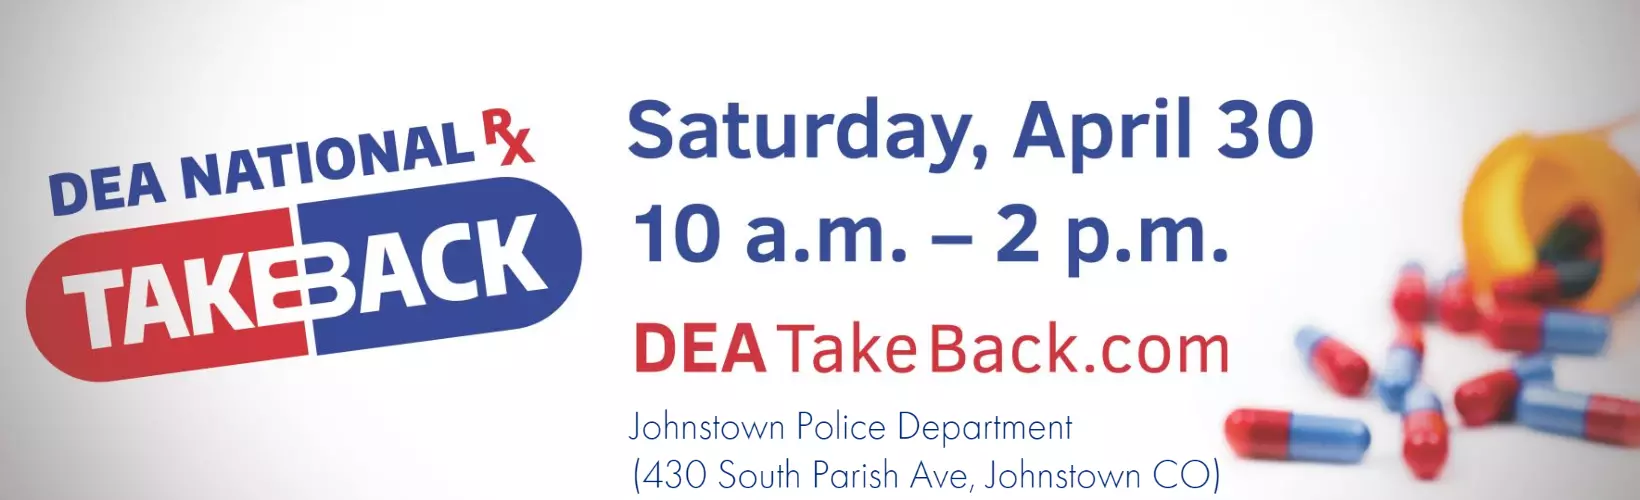 DEA Drug Take Back decorative image that includes date, time and location details of the event from the text on this page. This image also includes the Blue and Red pill-styled logo of the DEA National program